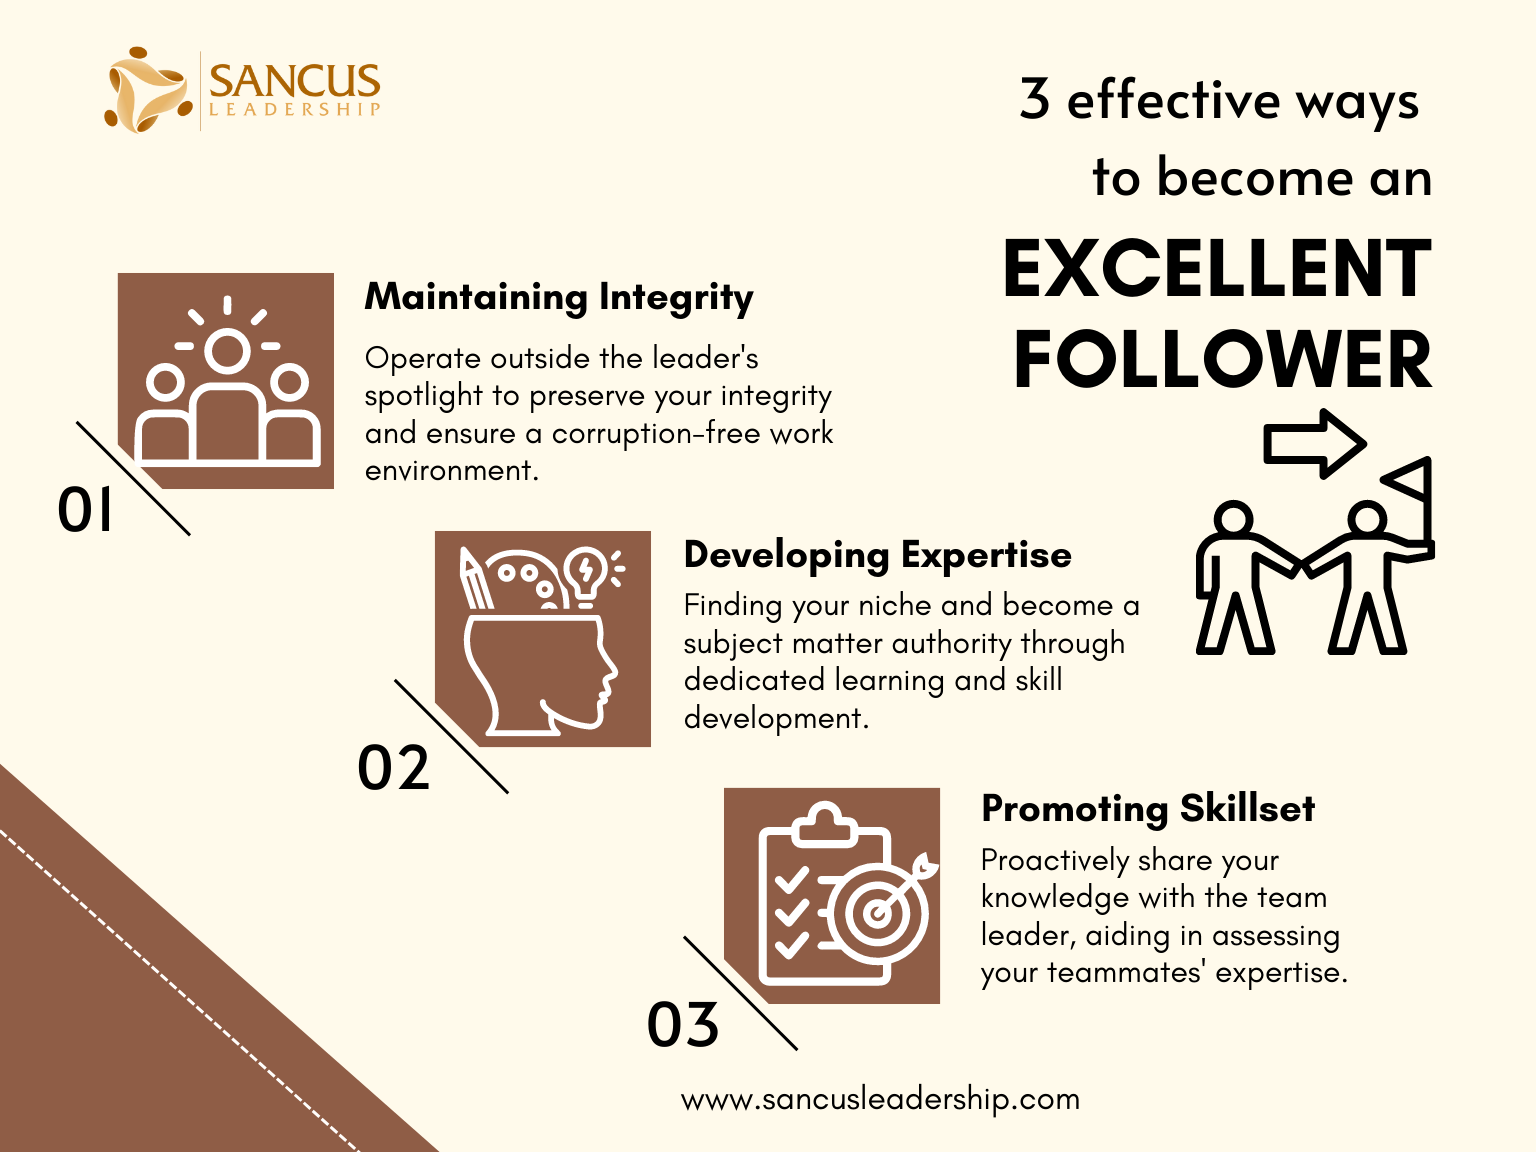 How to become an appreciated and excellent follower